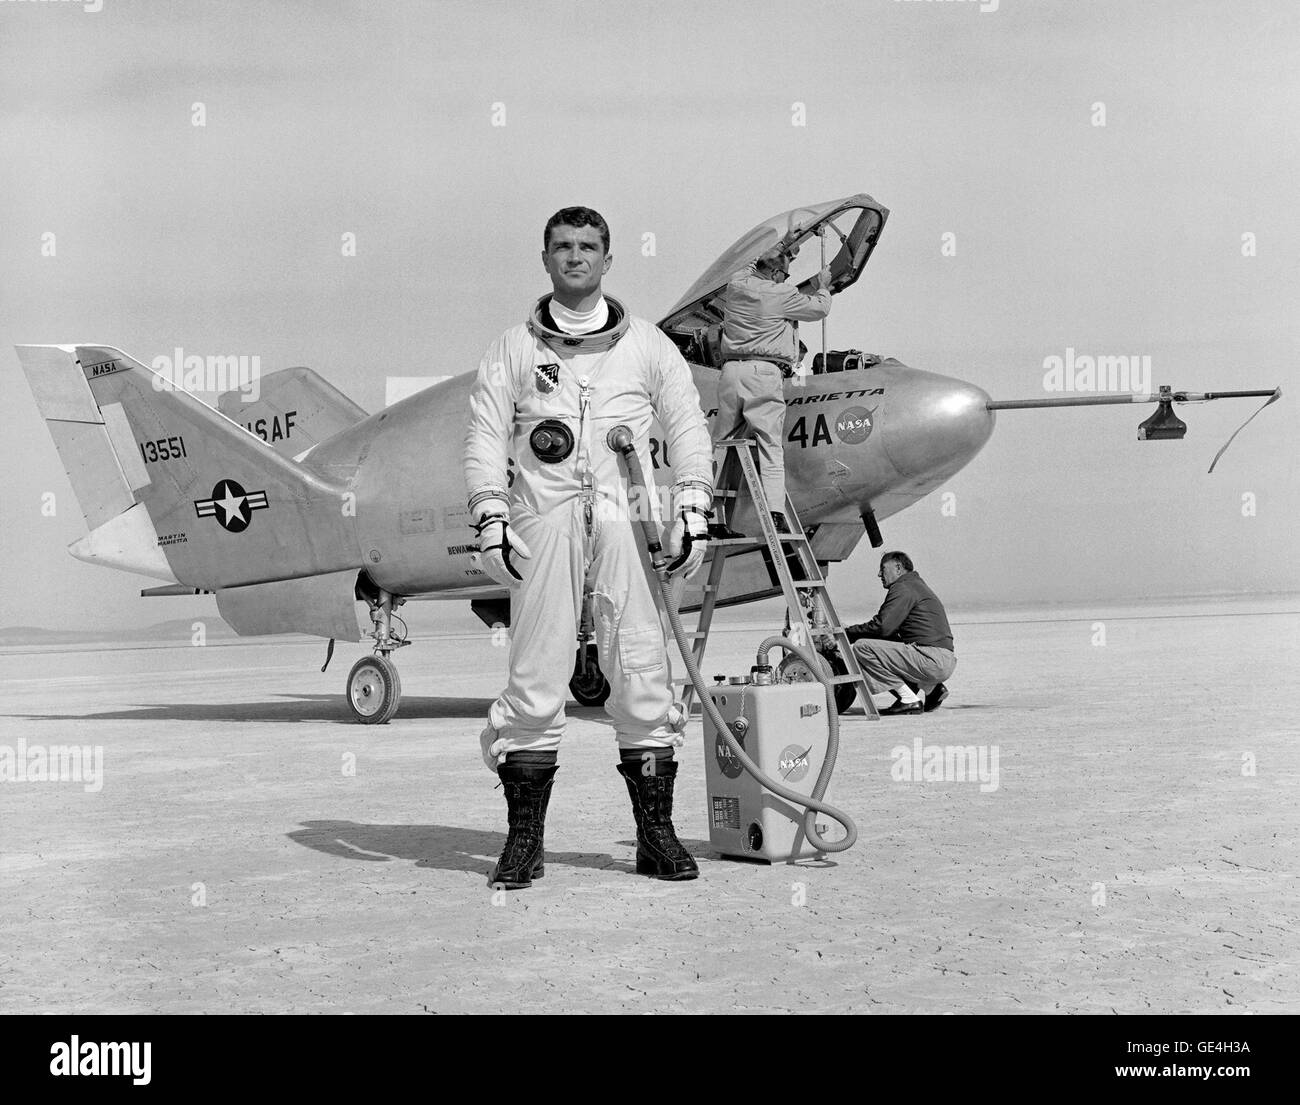 (November 30, 1970) Air Force pilot Major Cecil Powell stands in front of the X-24A after a research flight. Built for the Air Force by Martin Marietta, the X-24A was a bulbous vehicle shaped like a tear drop, with three vertical fins at the rear for directional control. It weighed 6,270 pounds, was just over 24 feet long, and had a width of nearly 14 feet. The first unpowered glide flight of the X-24A was on April 17, 1969. The pilot was Air Force Major Jerauld Gentry. Gentry also piloted the vehicle on its first powered flight March 19, 1970. It was flown 28 times in a program which, like th Stock Photo